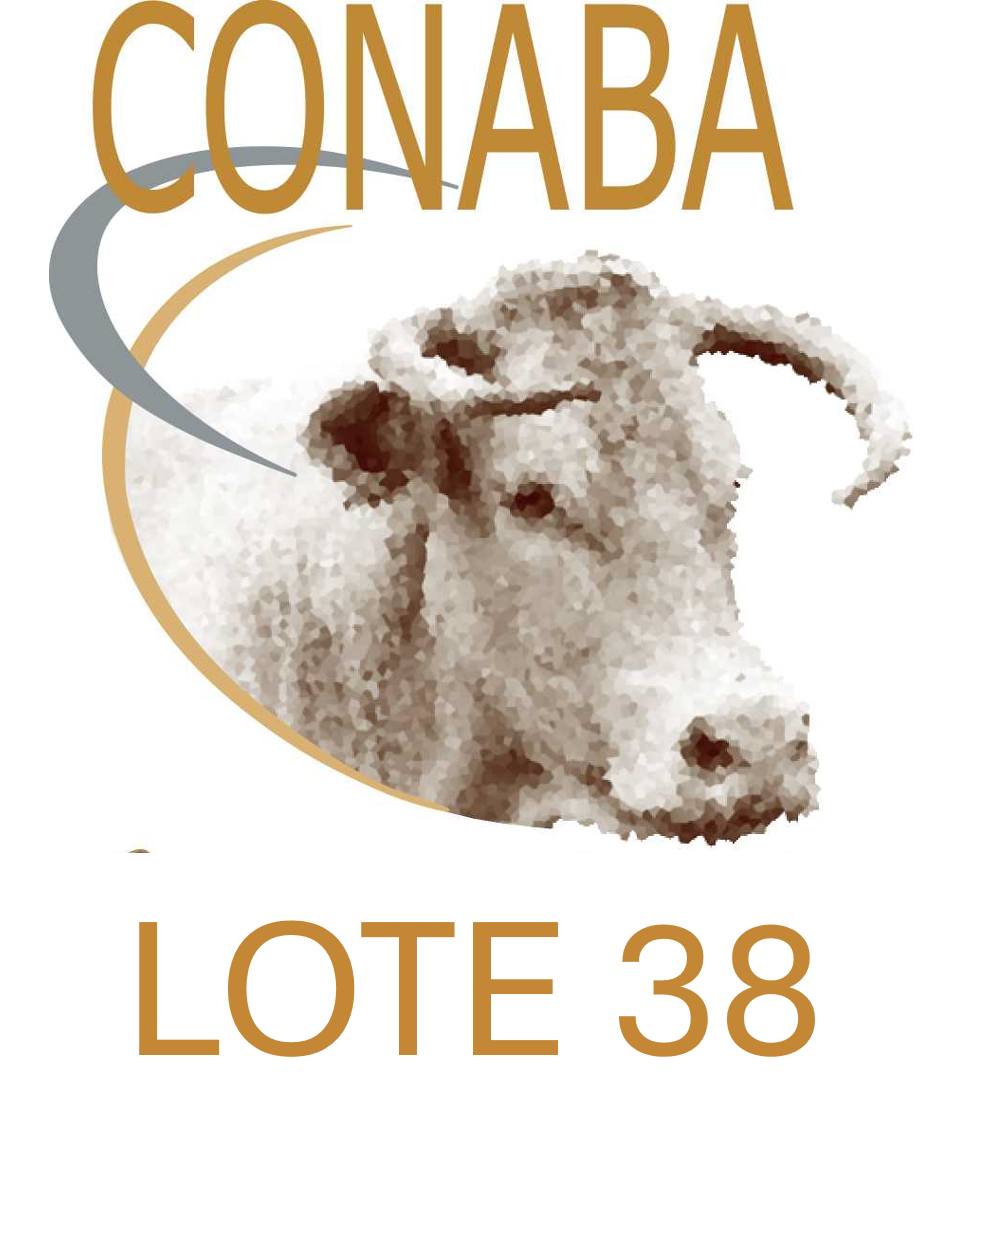 LOTE 38